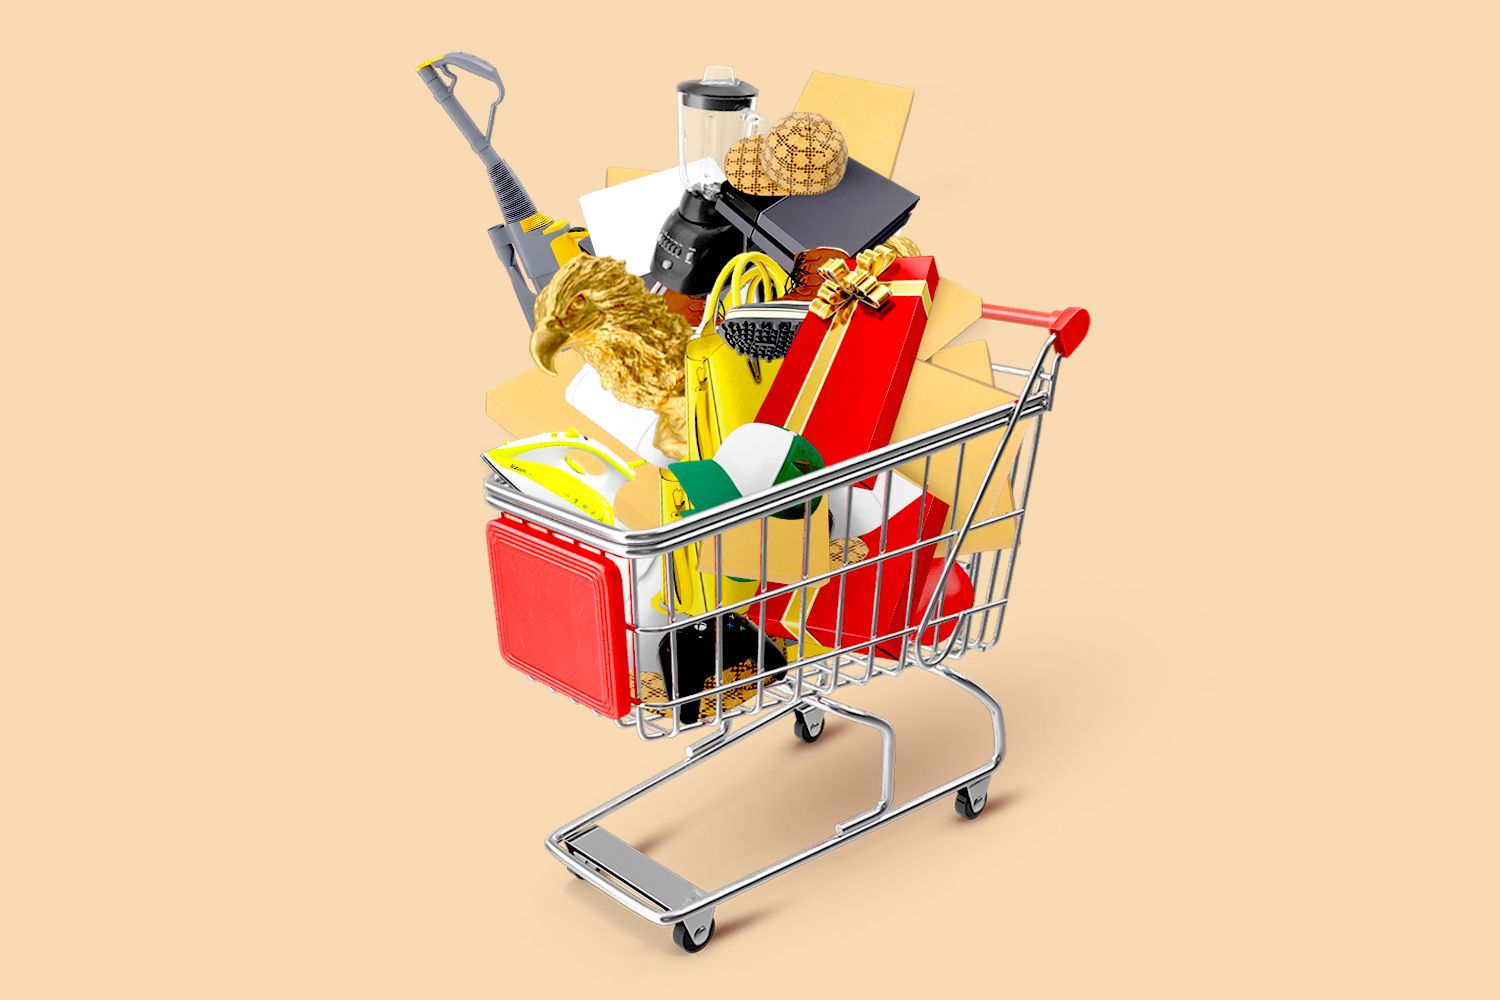 Shopping cart with holiday decorations and packages